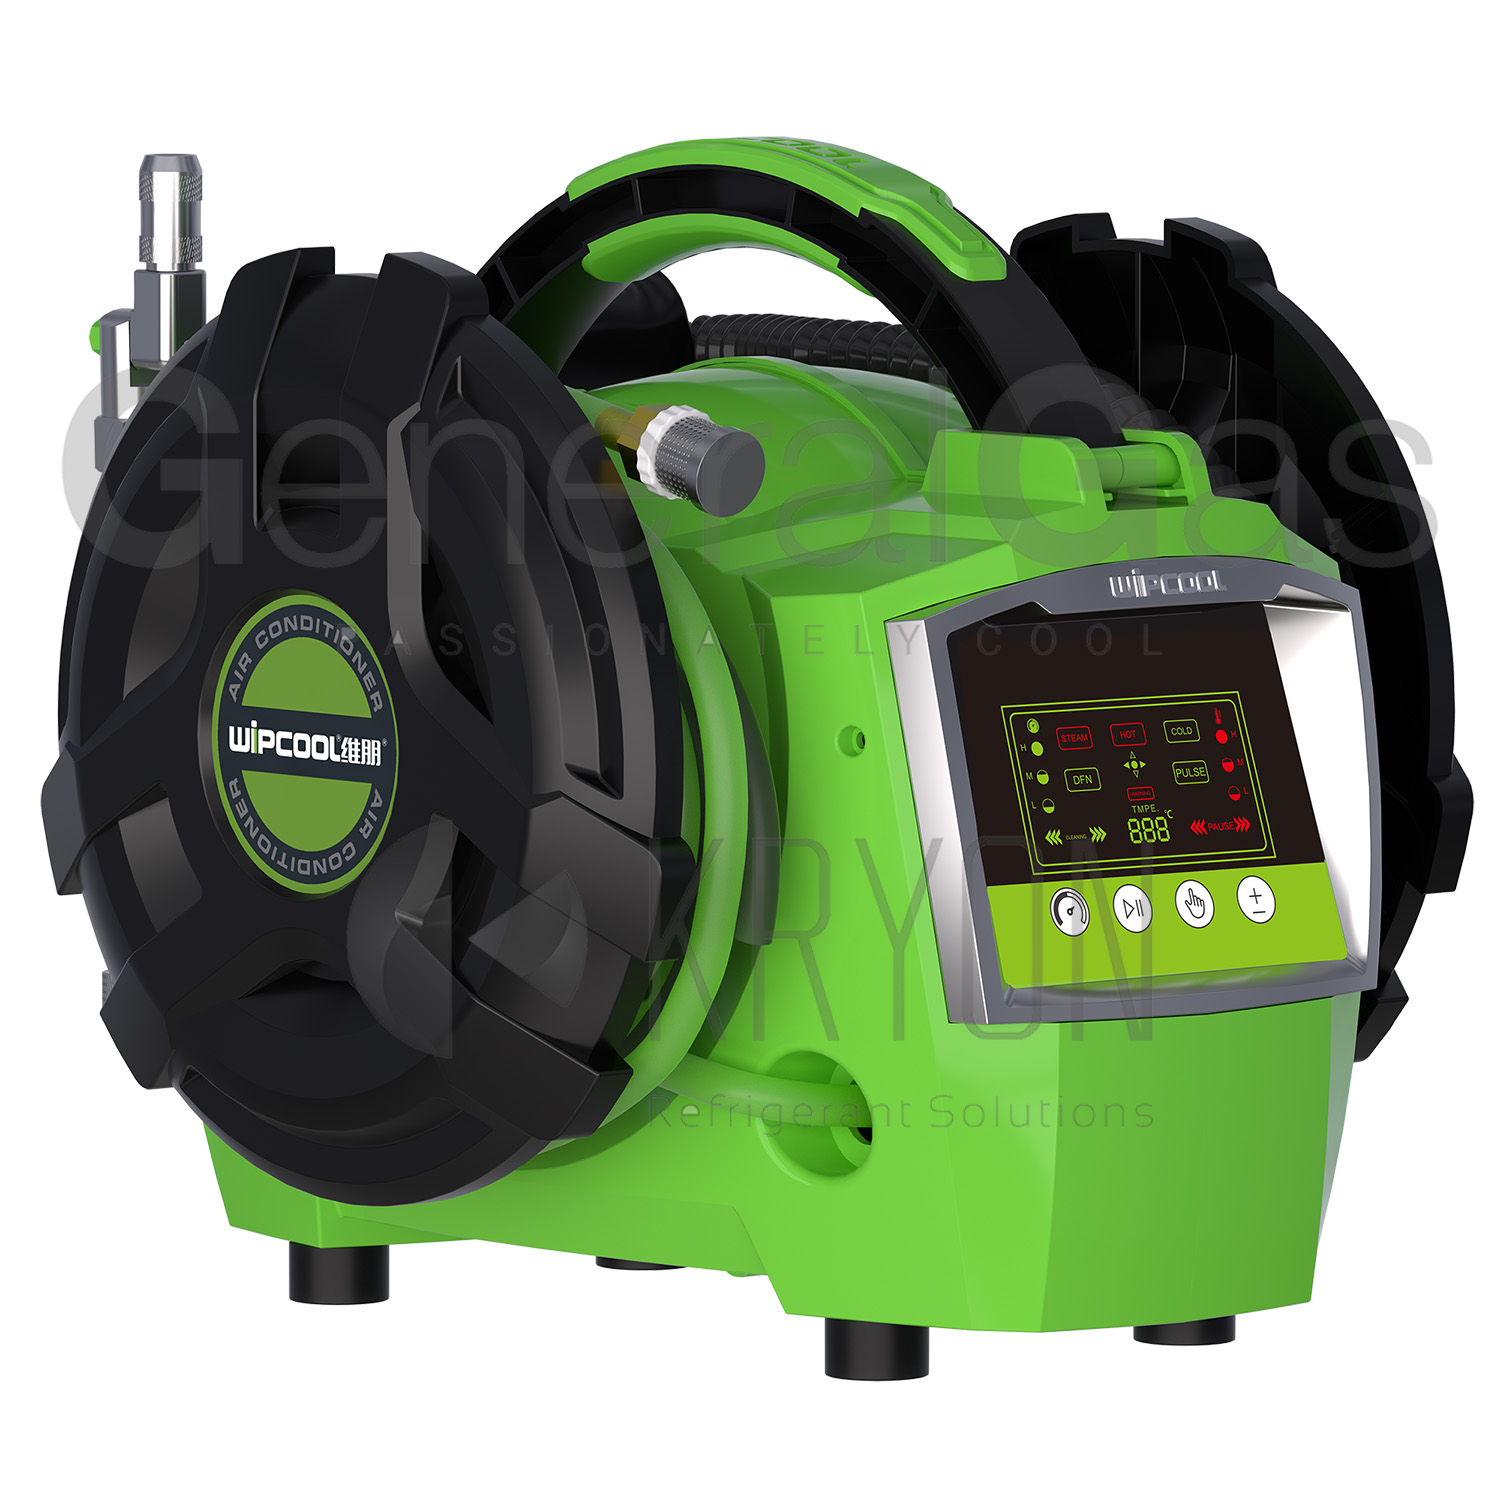 Steam cleaner and ozonizer for indoor units A/C systems - mod. C30S